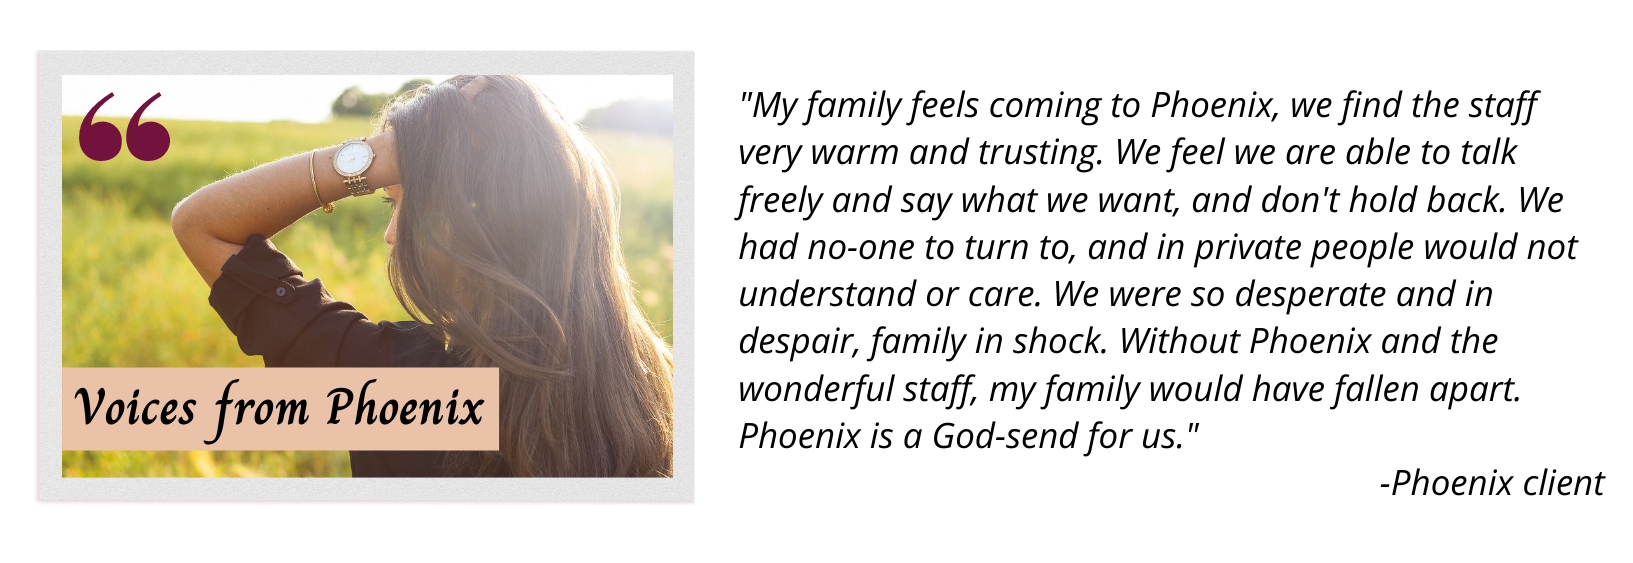 Voices from Phoenix testimonial from phoenix client with picture overset of a woman looking at a field with her hand in her hair.